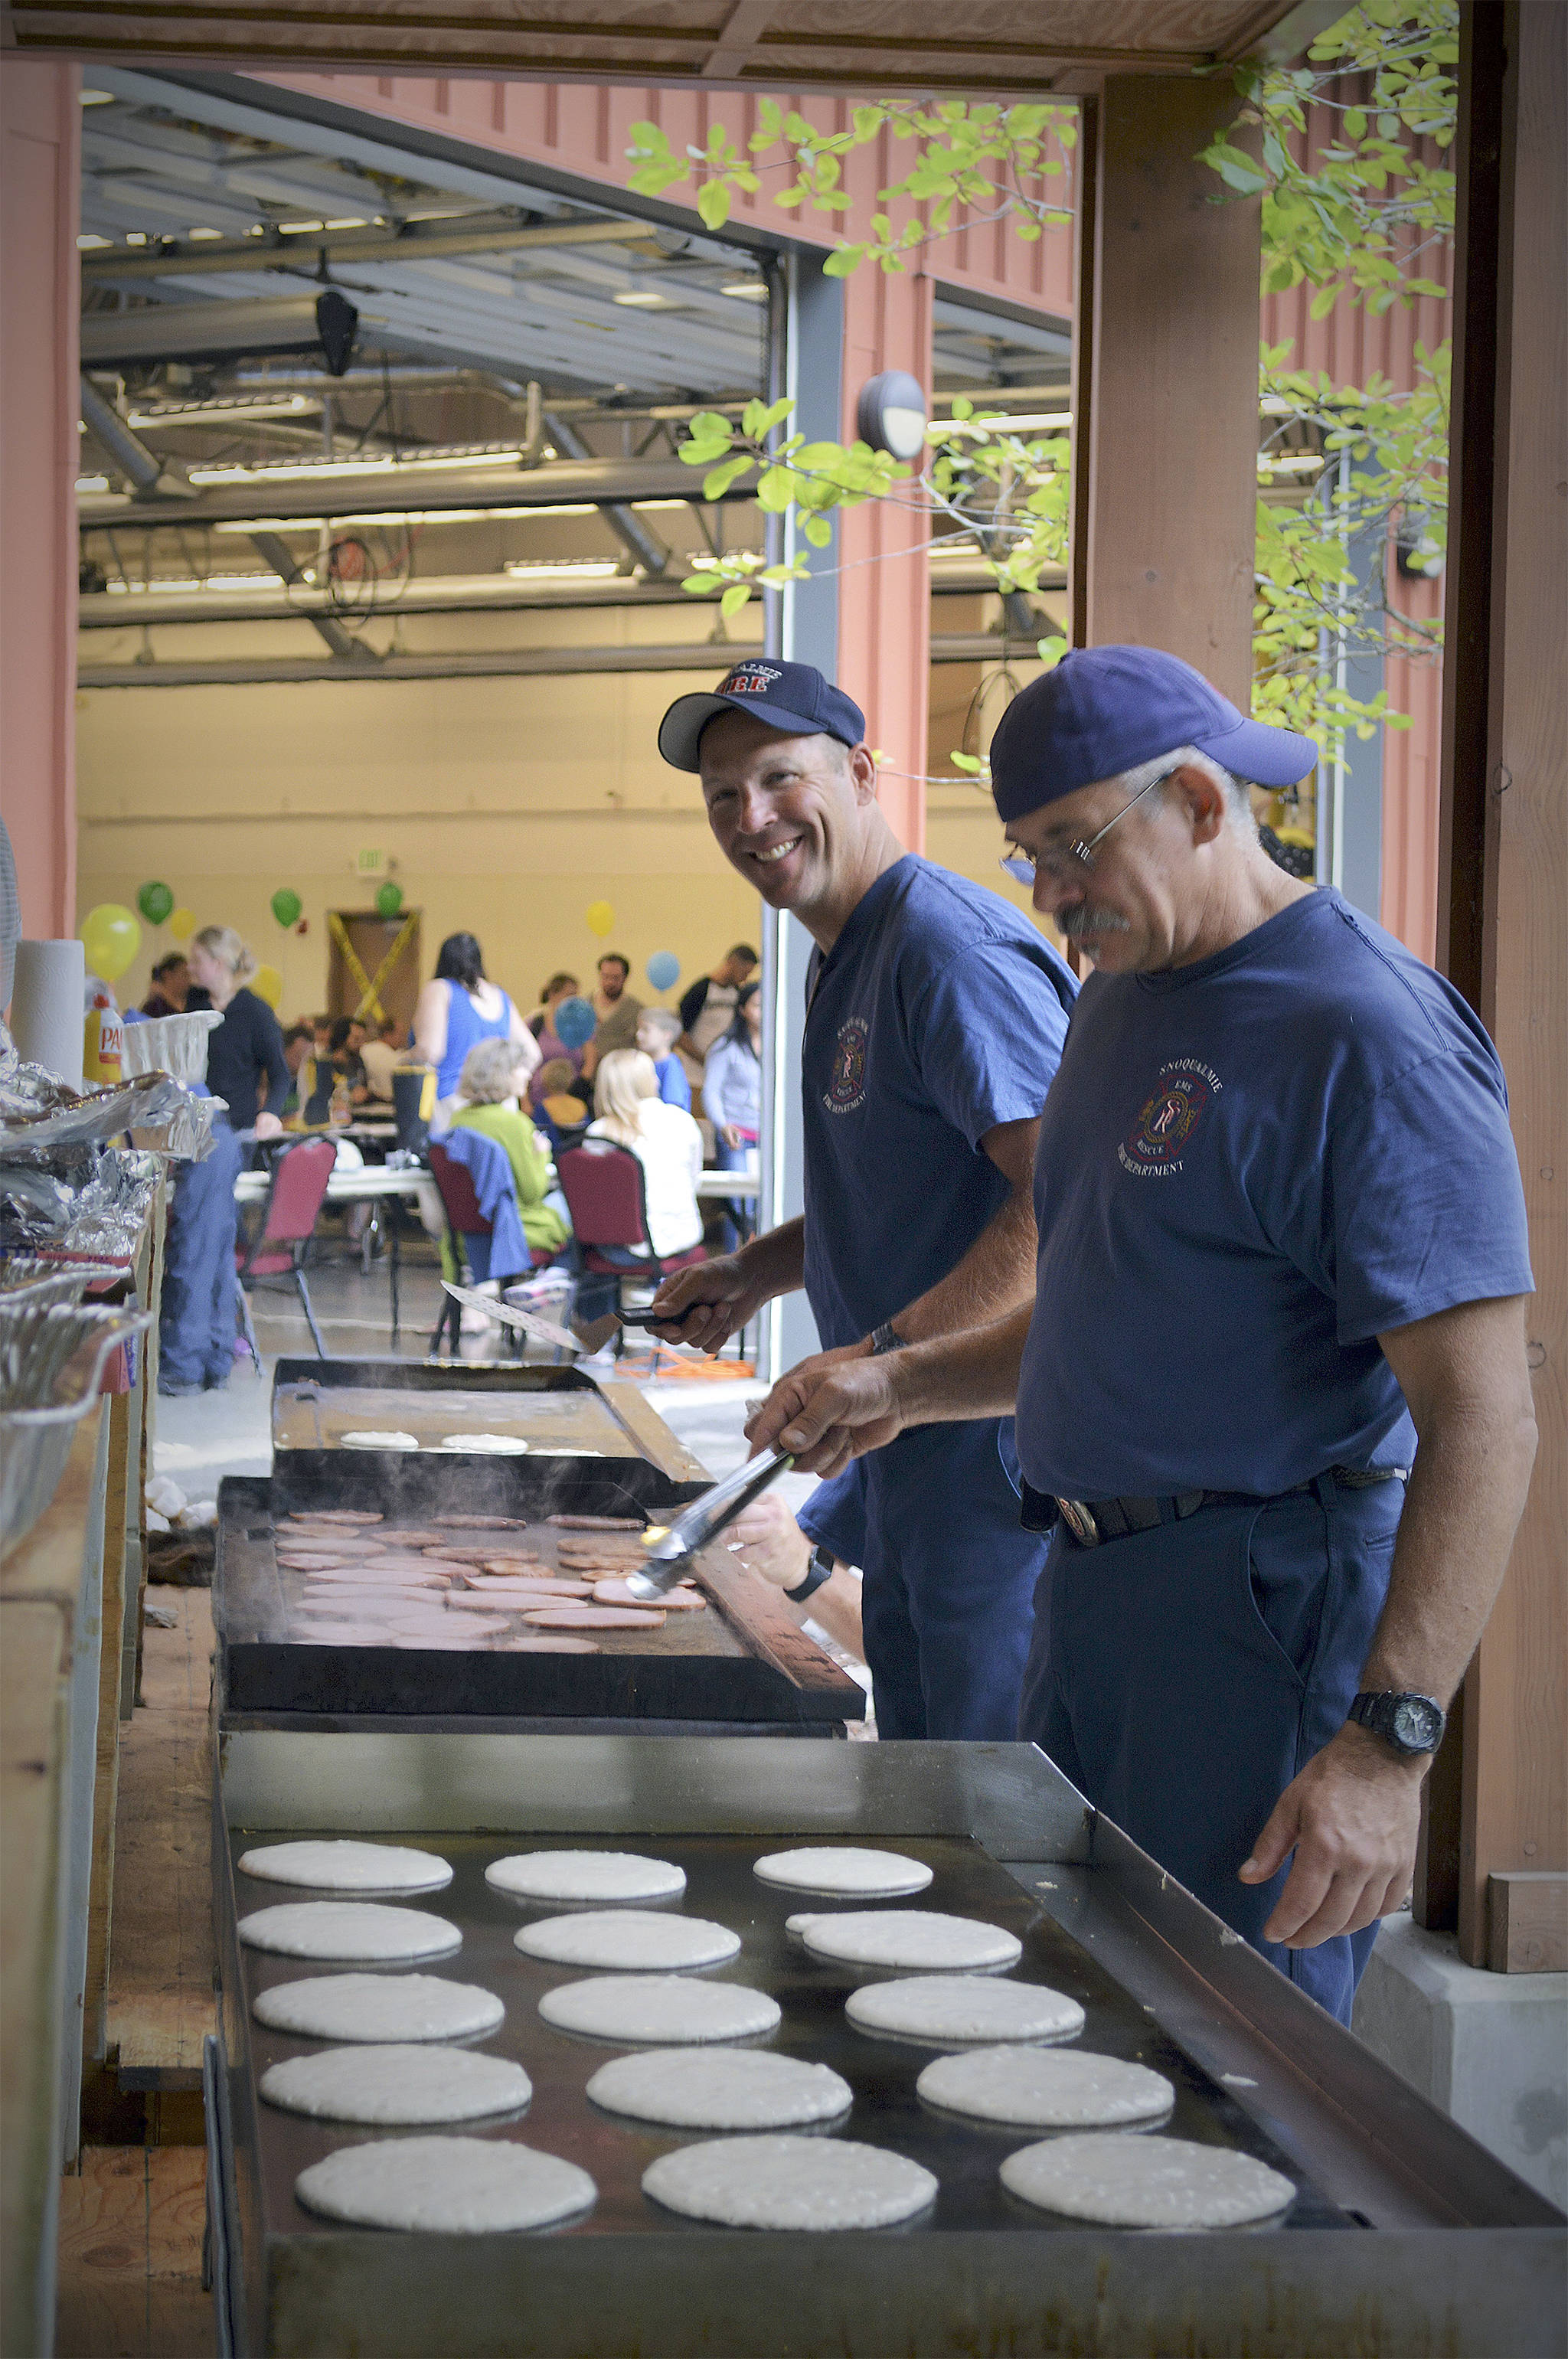 File Photo                                Firefighters cooking up pancakes at the 2016 Pancake Breakfast.